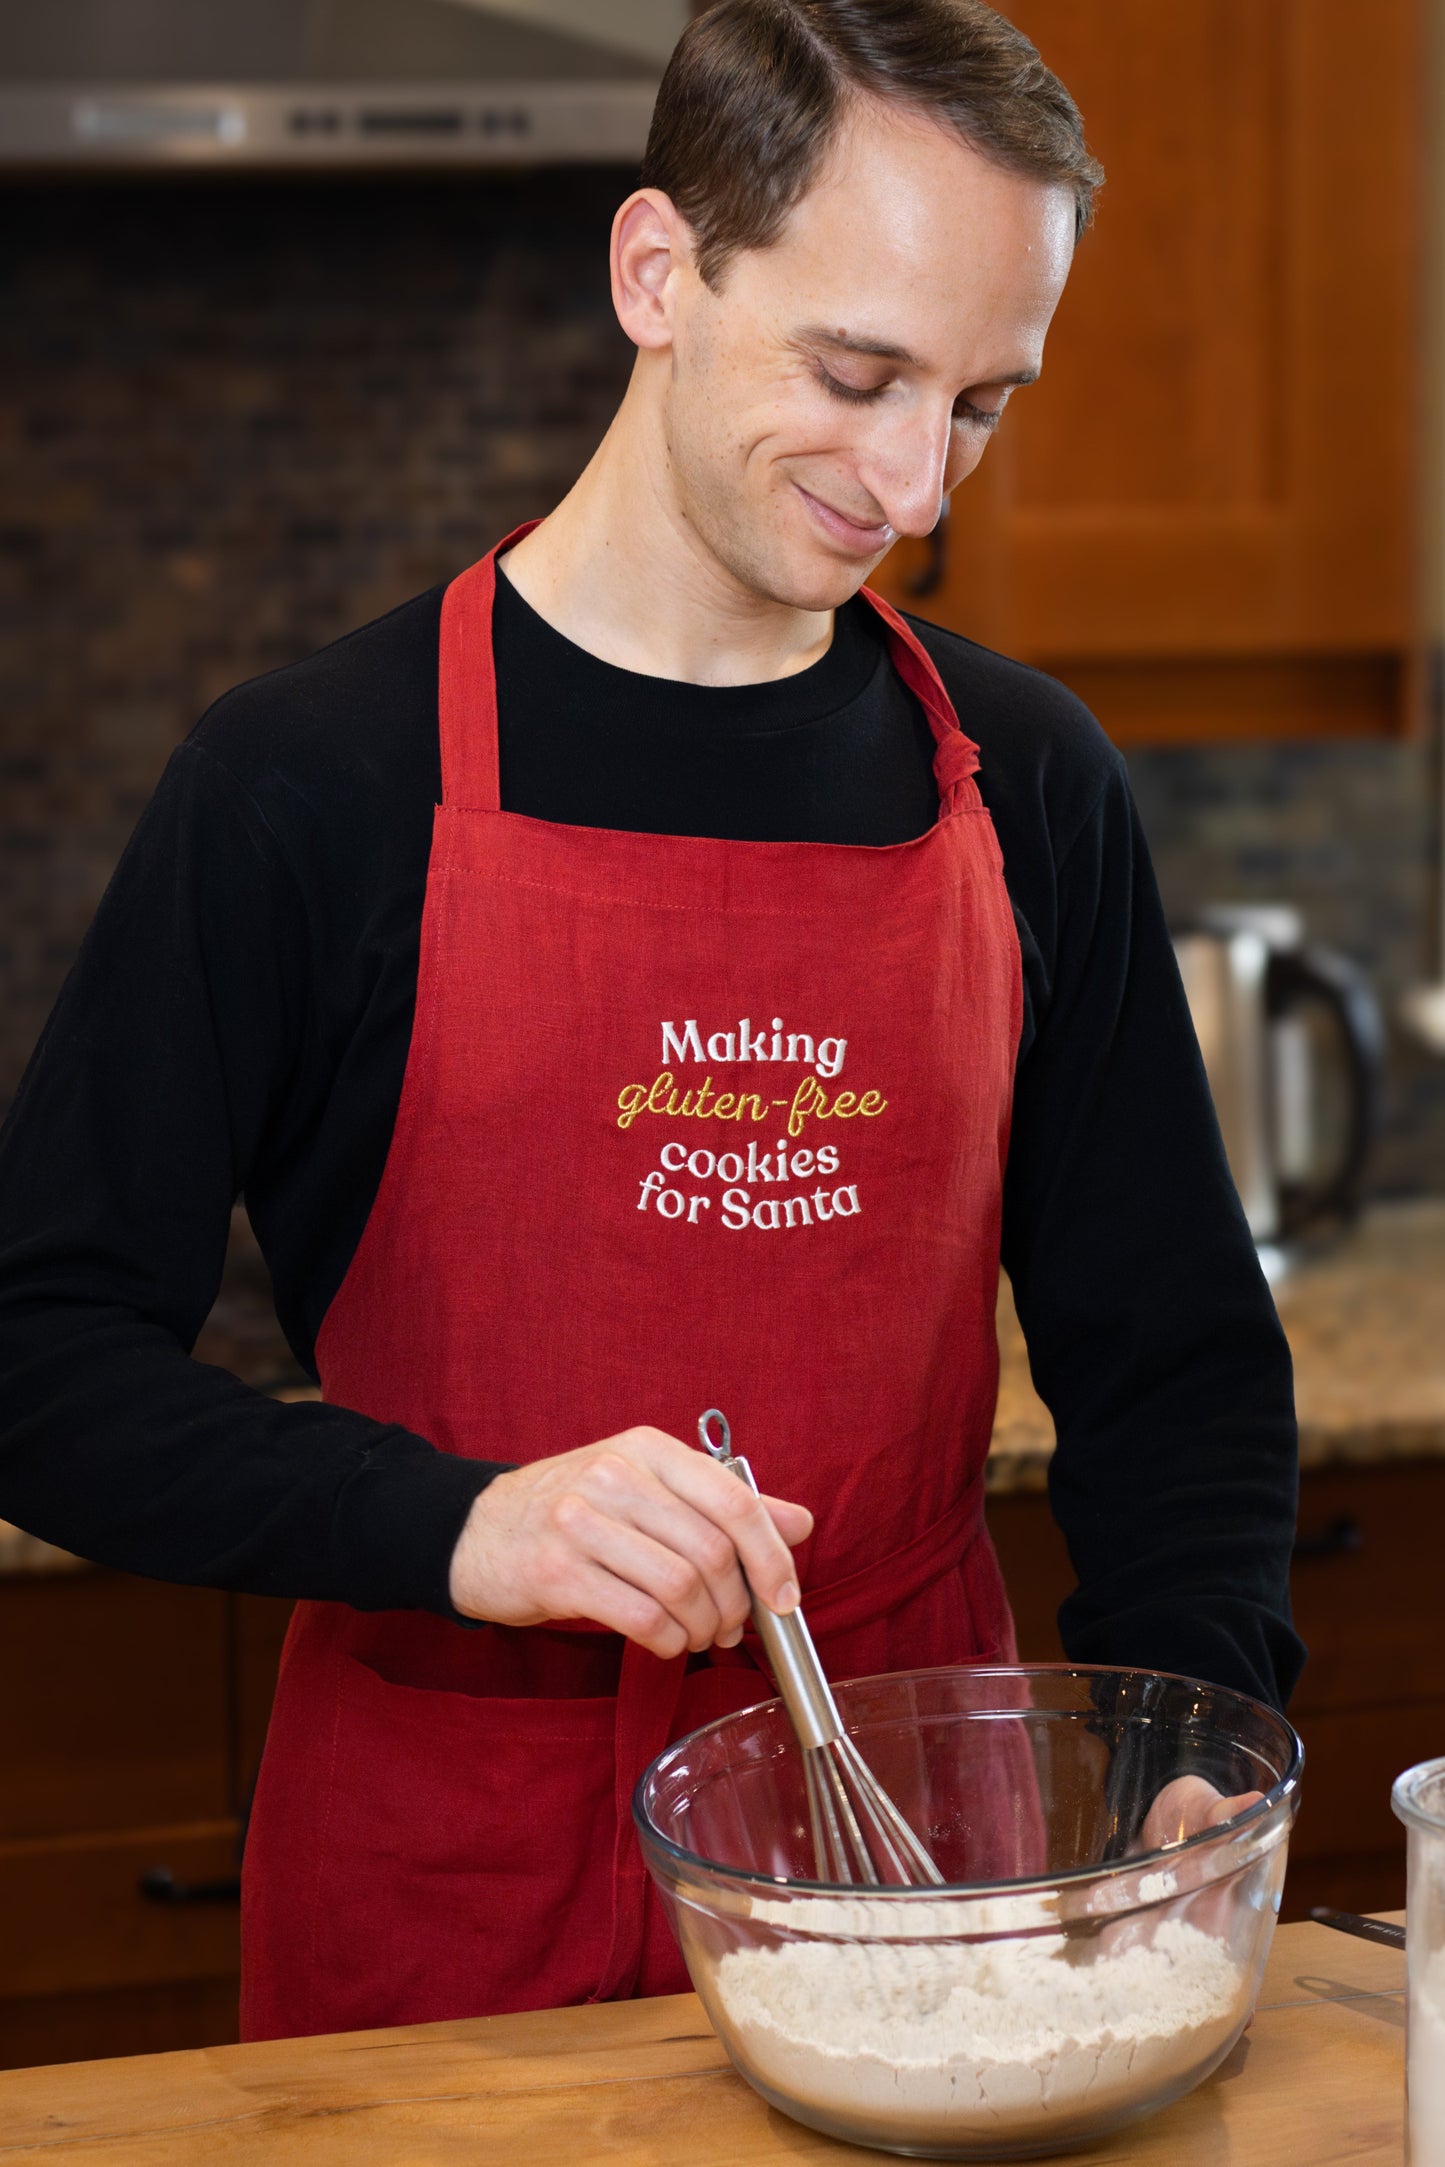 Man wearing red Christmas apron with "Making gluten-free cookies for Santa"